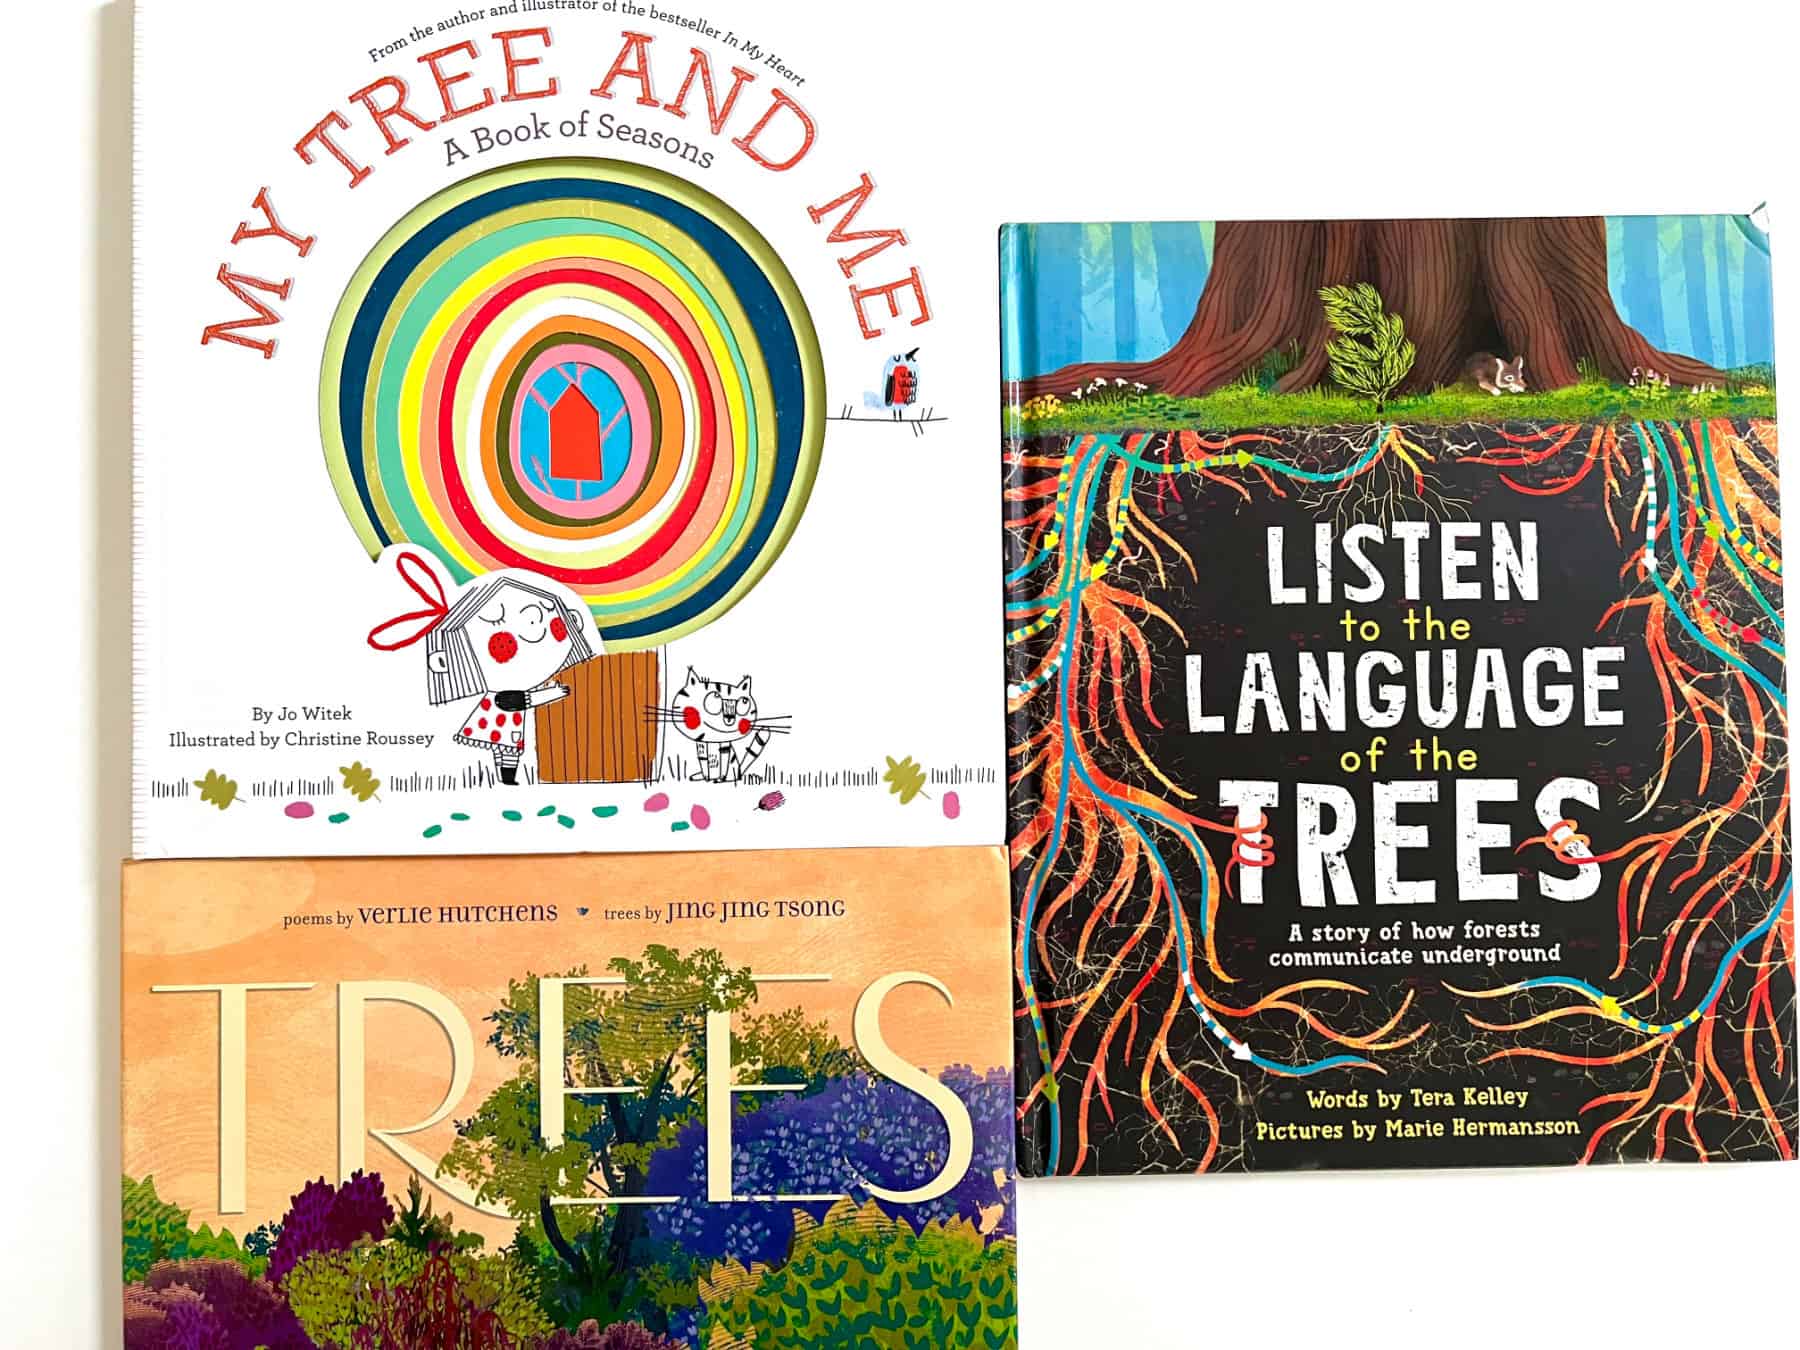 tree books / books about trees